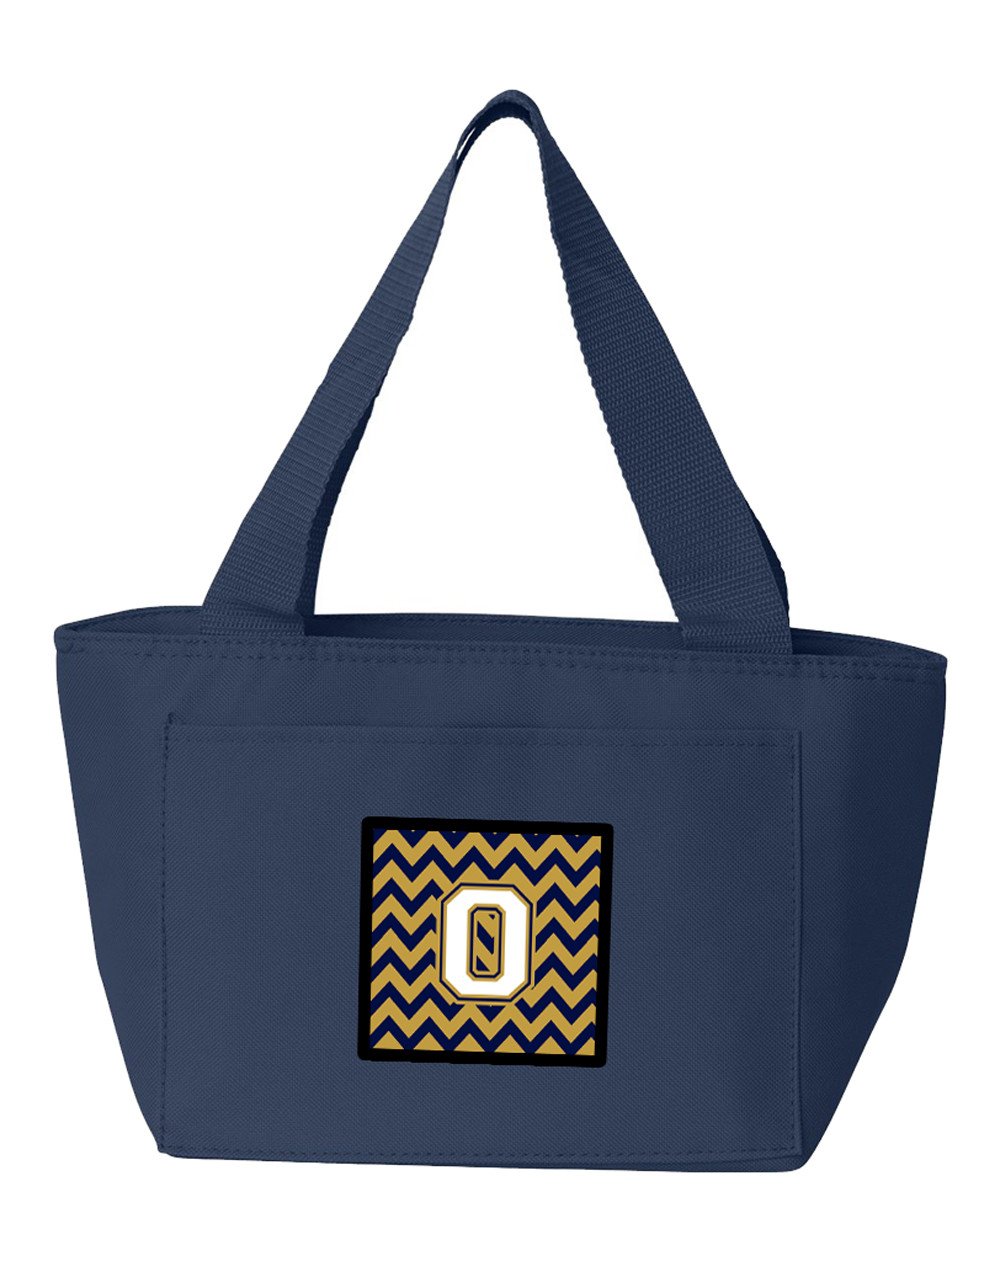 Letter O Chevron Navy Blue and Gold Lunch Bag CJ1057-ONA-8808 by Caroline's Treasures